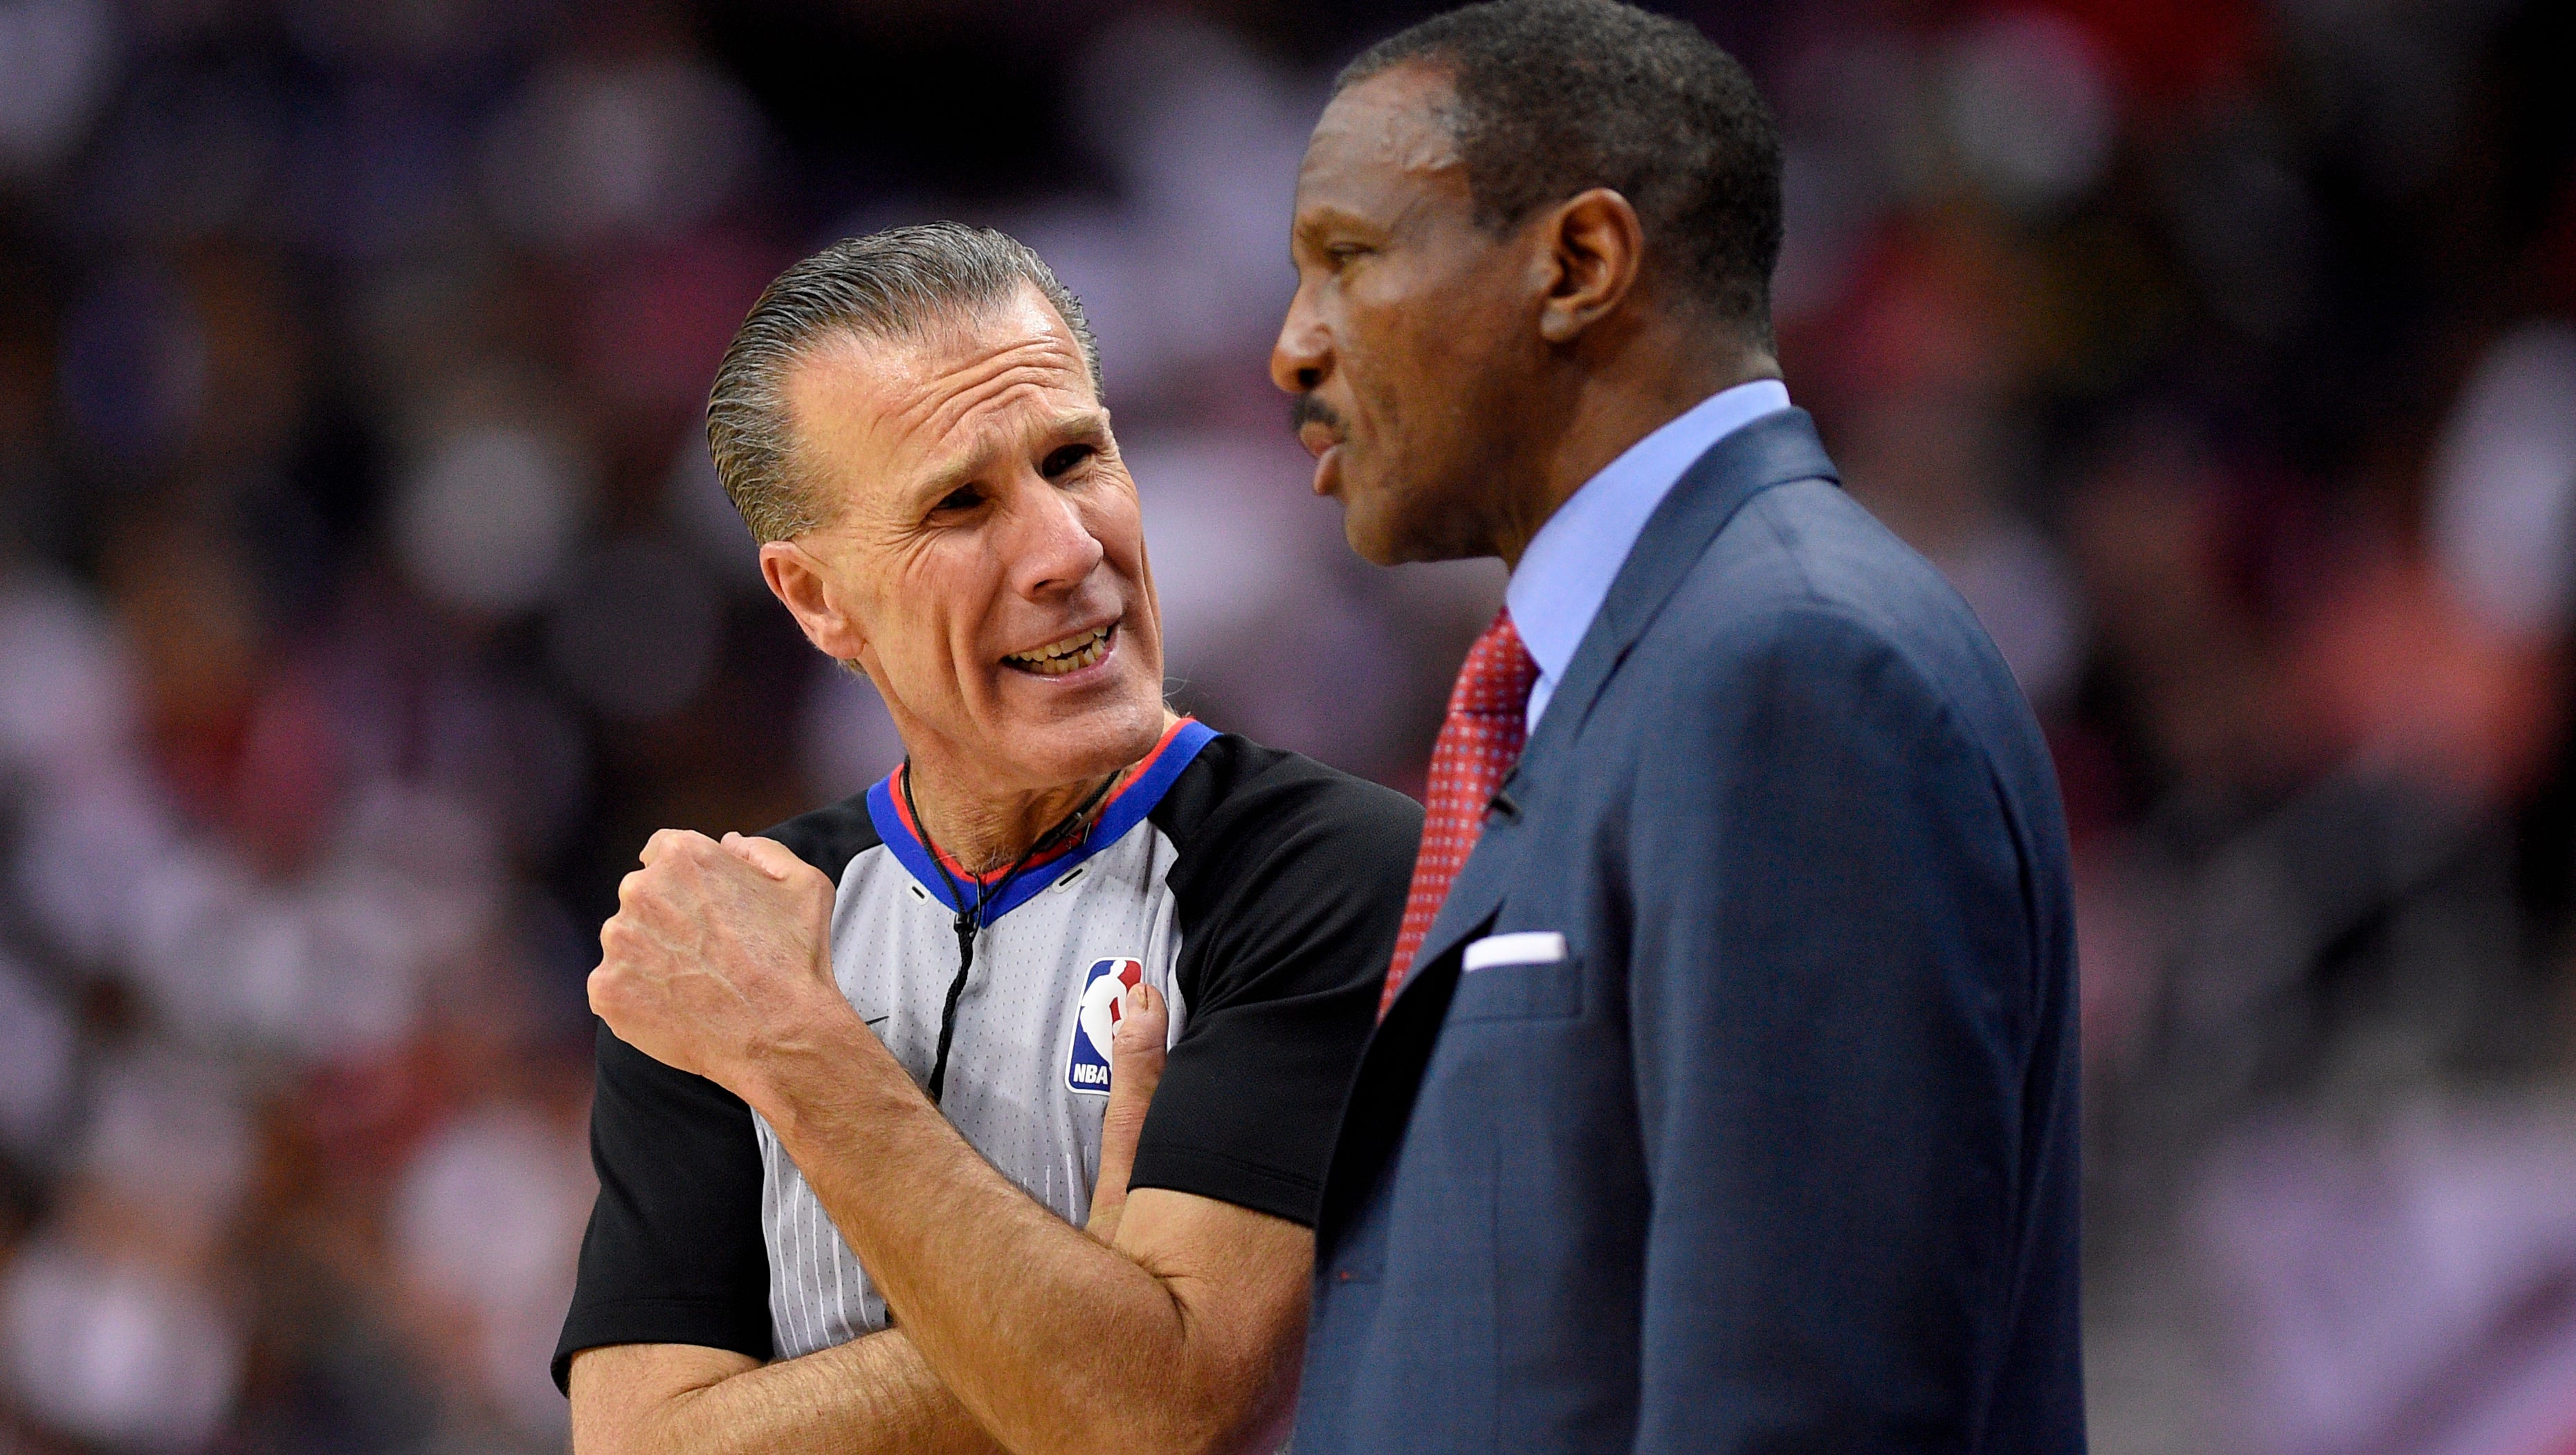 Referee Ken Mauer, left, talks with Toronto Raptors head coach Dwane Casey, right, during the second half of Game 3 of an NBA basketball first-round playoff series, Friday, April 20, 2018, in Washington. The Wizards won 122-103.